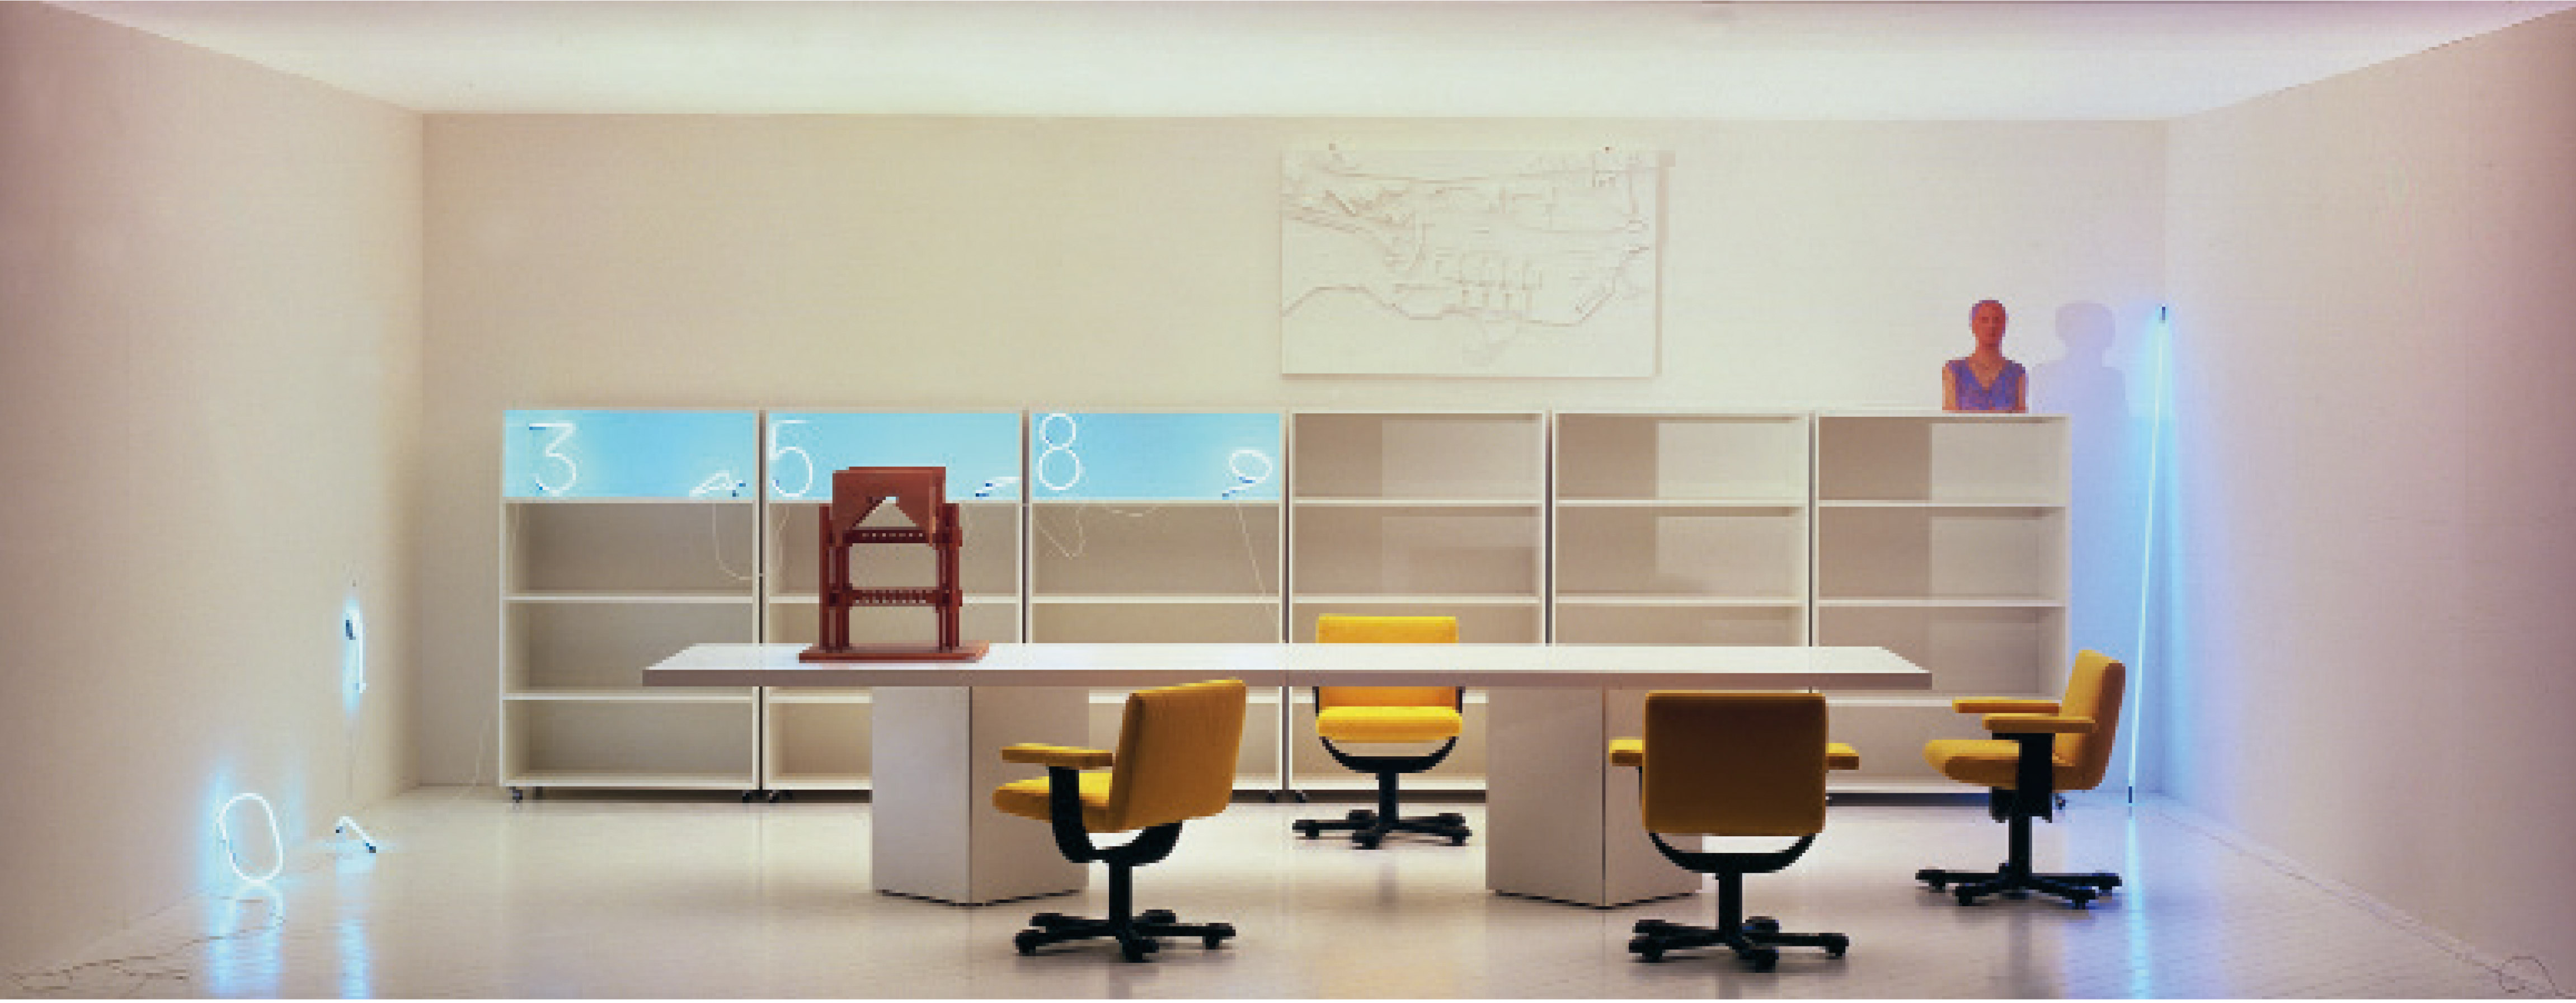 The Modulo3 system, designed by Bob Noorda and Franco Mirenzi, photographed in the early 1980s for the new UniFor corporate identity, curated by Pierluigi Cerri.